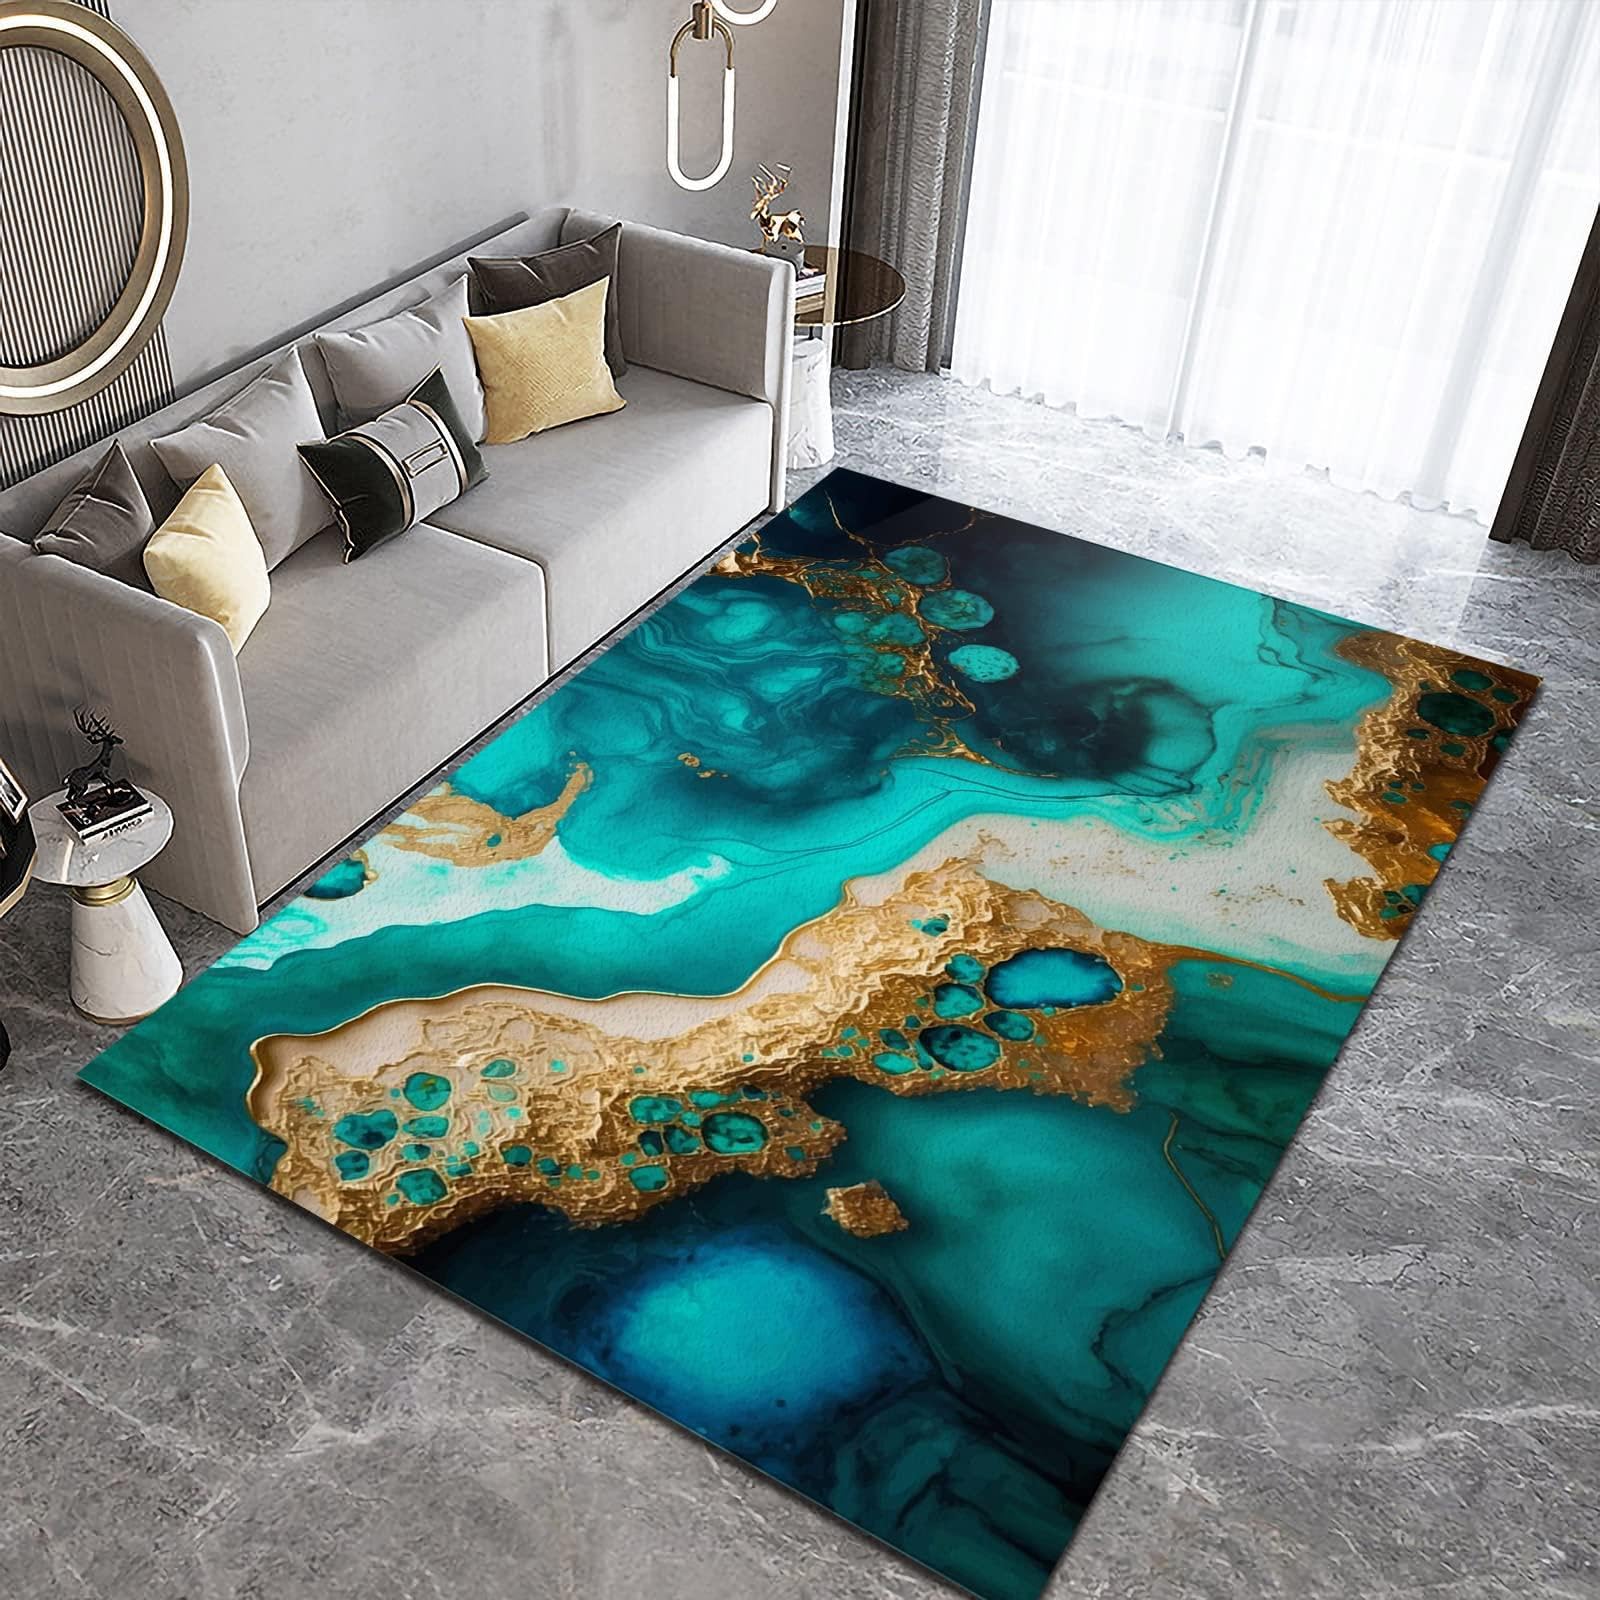 Light Luxury Turquoise Jade Texture Printed Area Rugs, Abstract Gold Marble Minimalist Washable Rug, Soft Fluffy Large Floor Carpet for Bed Room Living Room Dining Room Kitchen 3x4ft